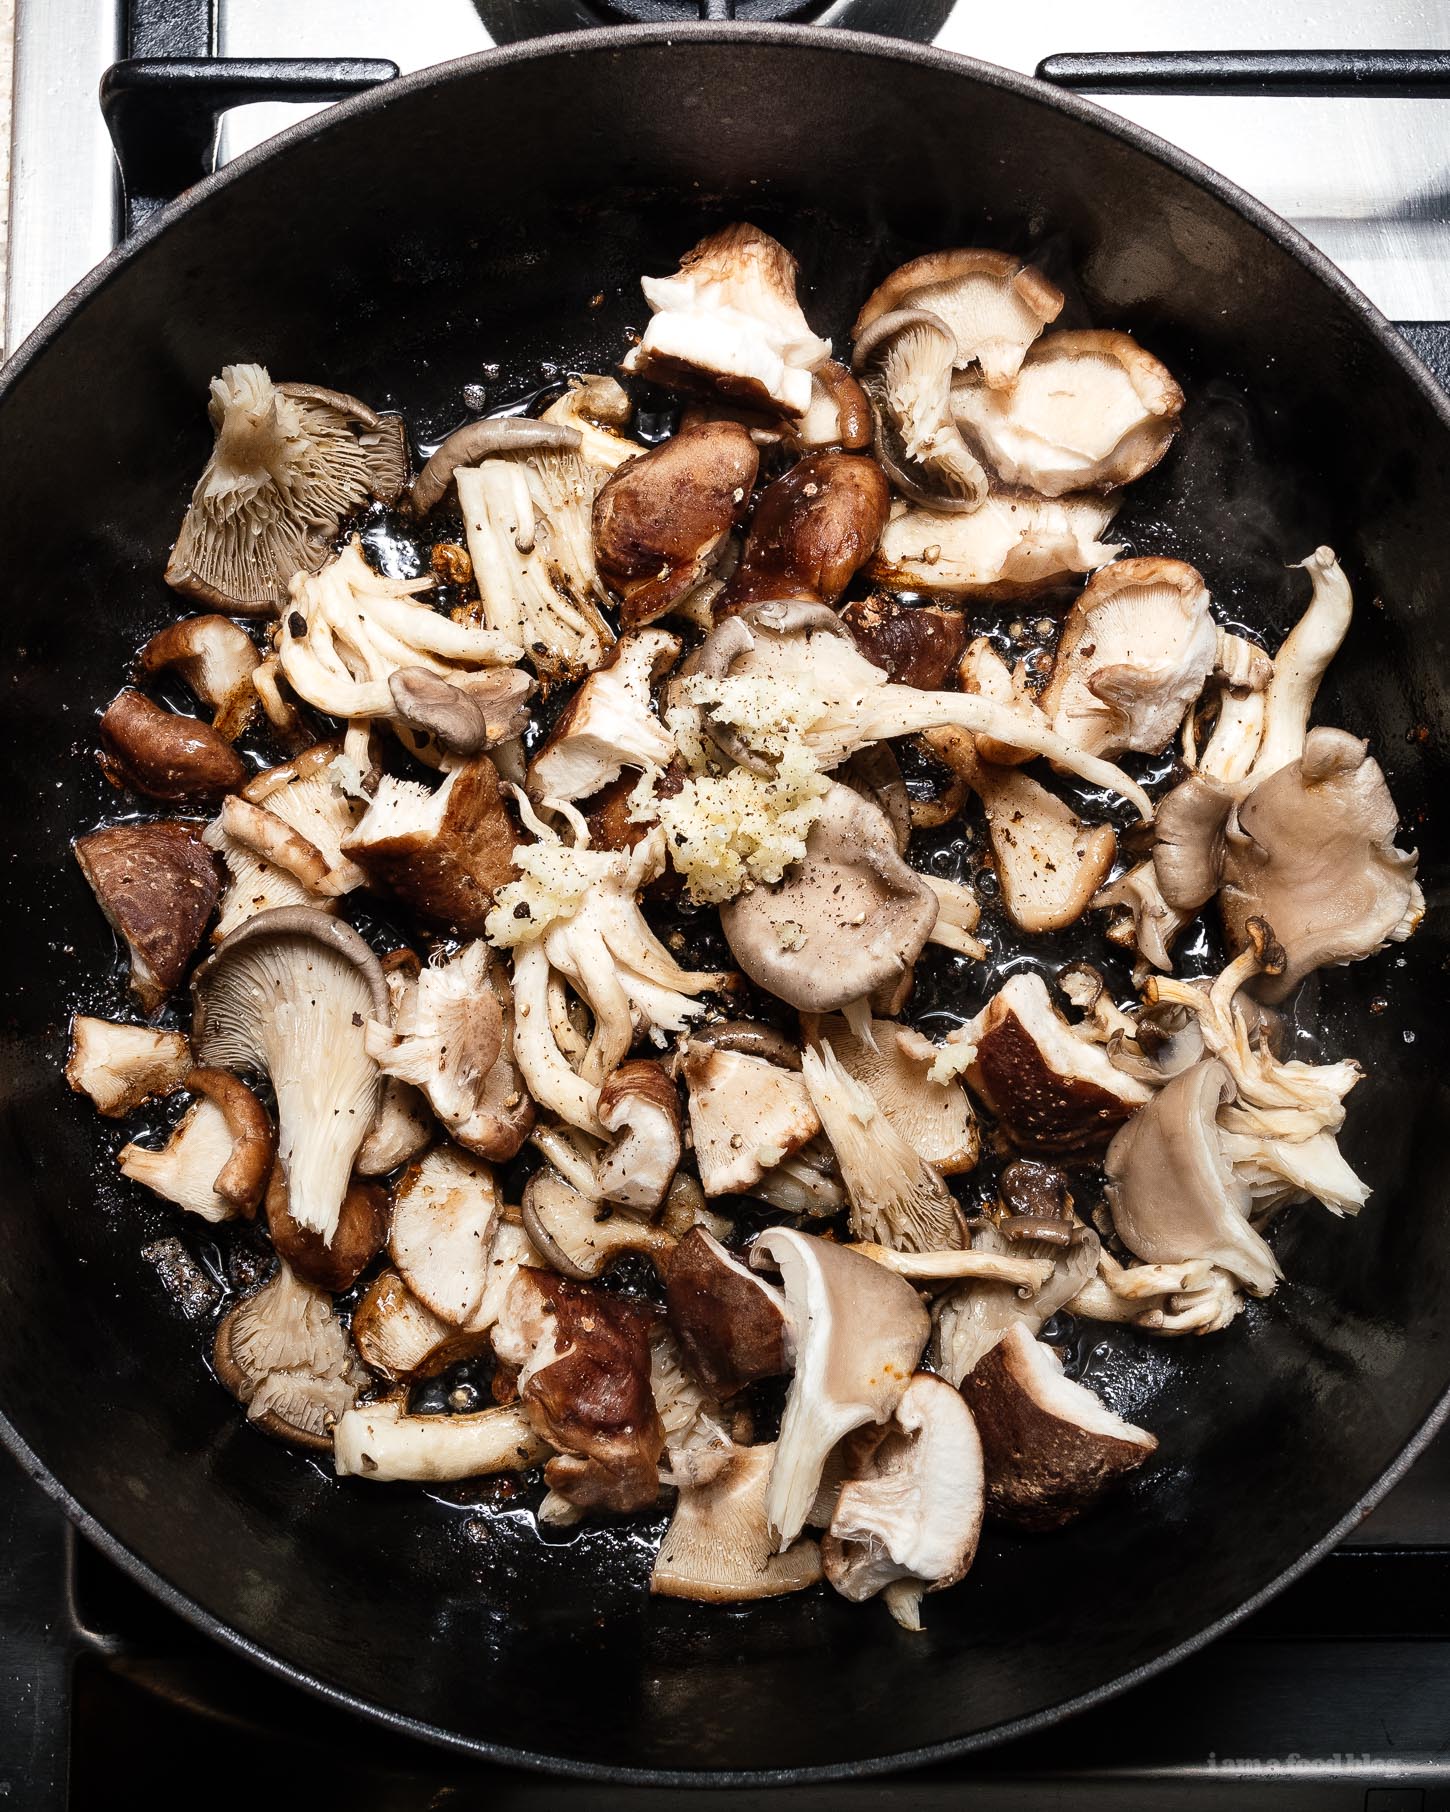 Creamy, umami packed garlicky brown butter mushroom risotto: nutty brown butter pan seared mushrooms throughout and on top. | www.iamafoodblog.com